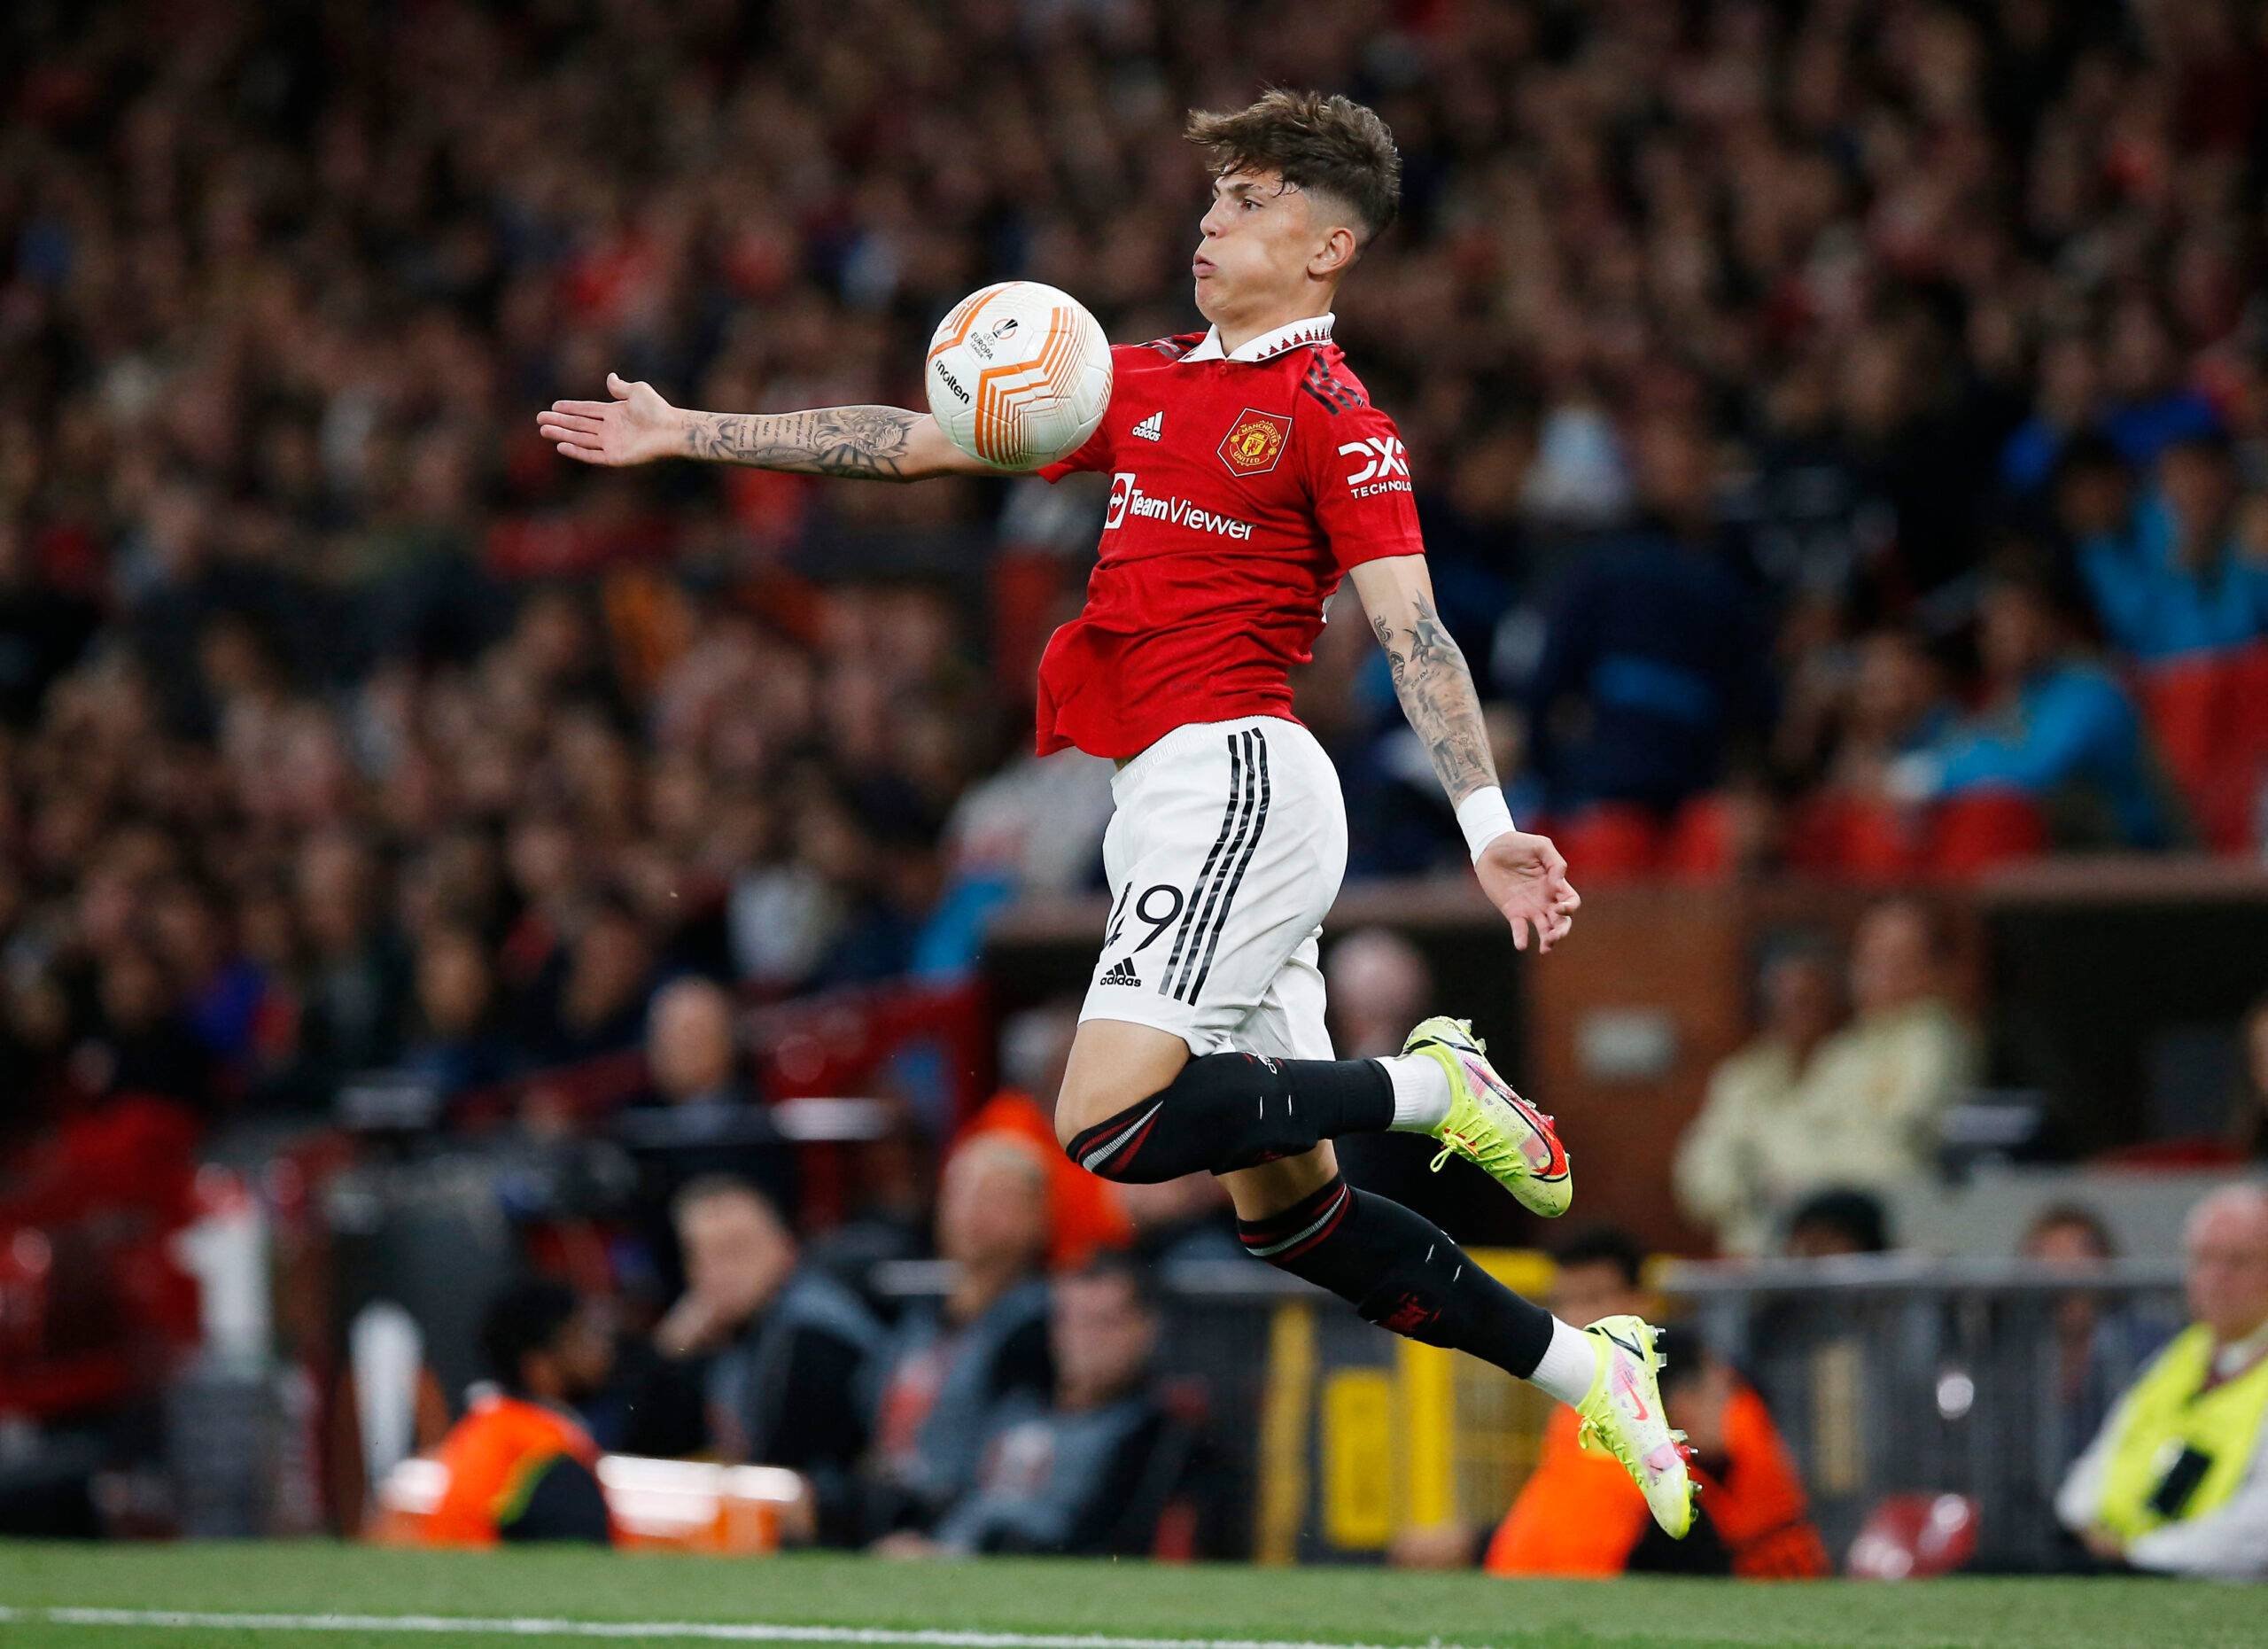 Erik Ten hag has asked Man Utd to give contract extension to Old Trafford's best kid